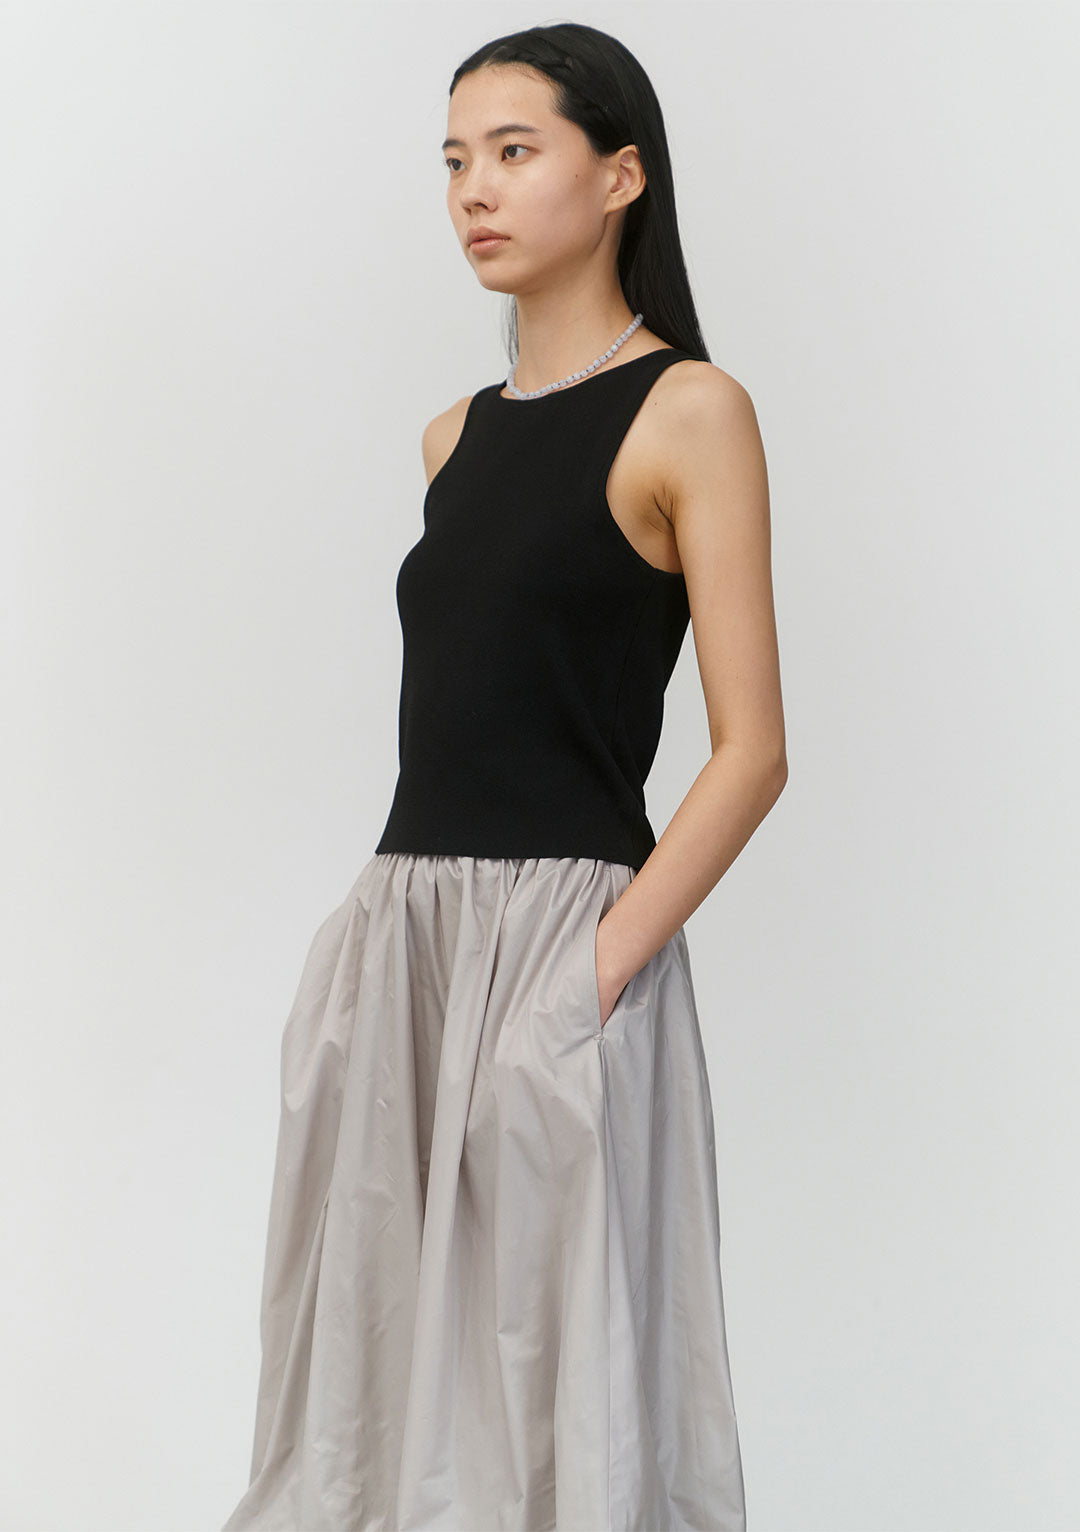 AMOMENTO CUT-OUT SLEEVELESS TOP